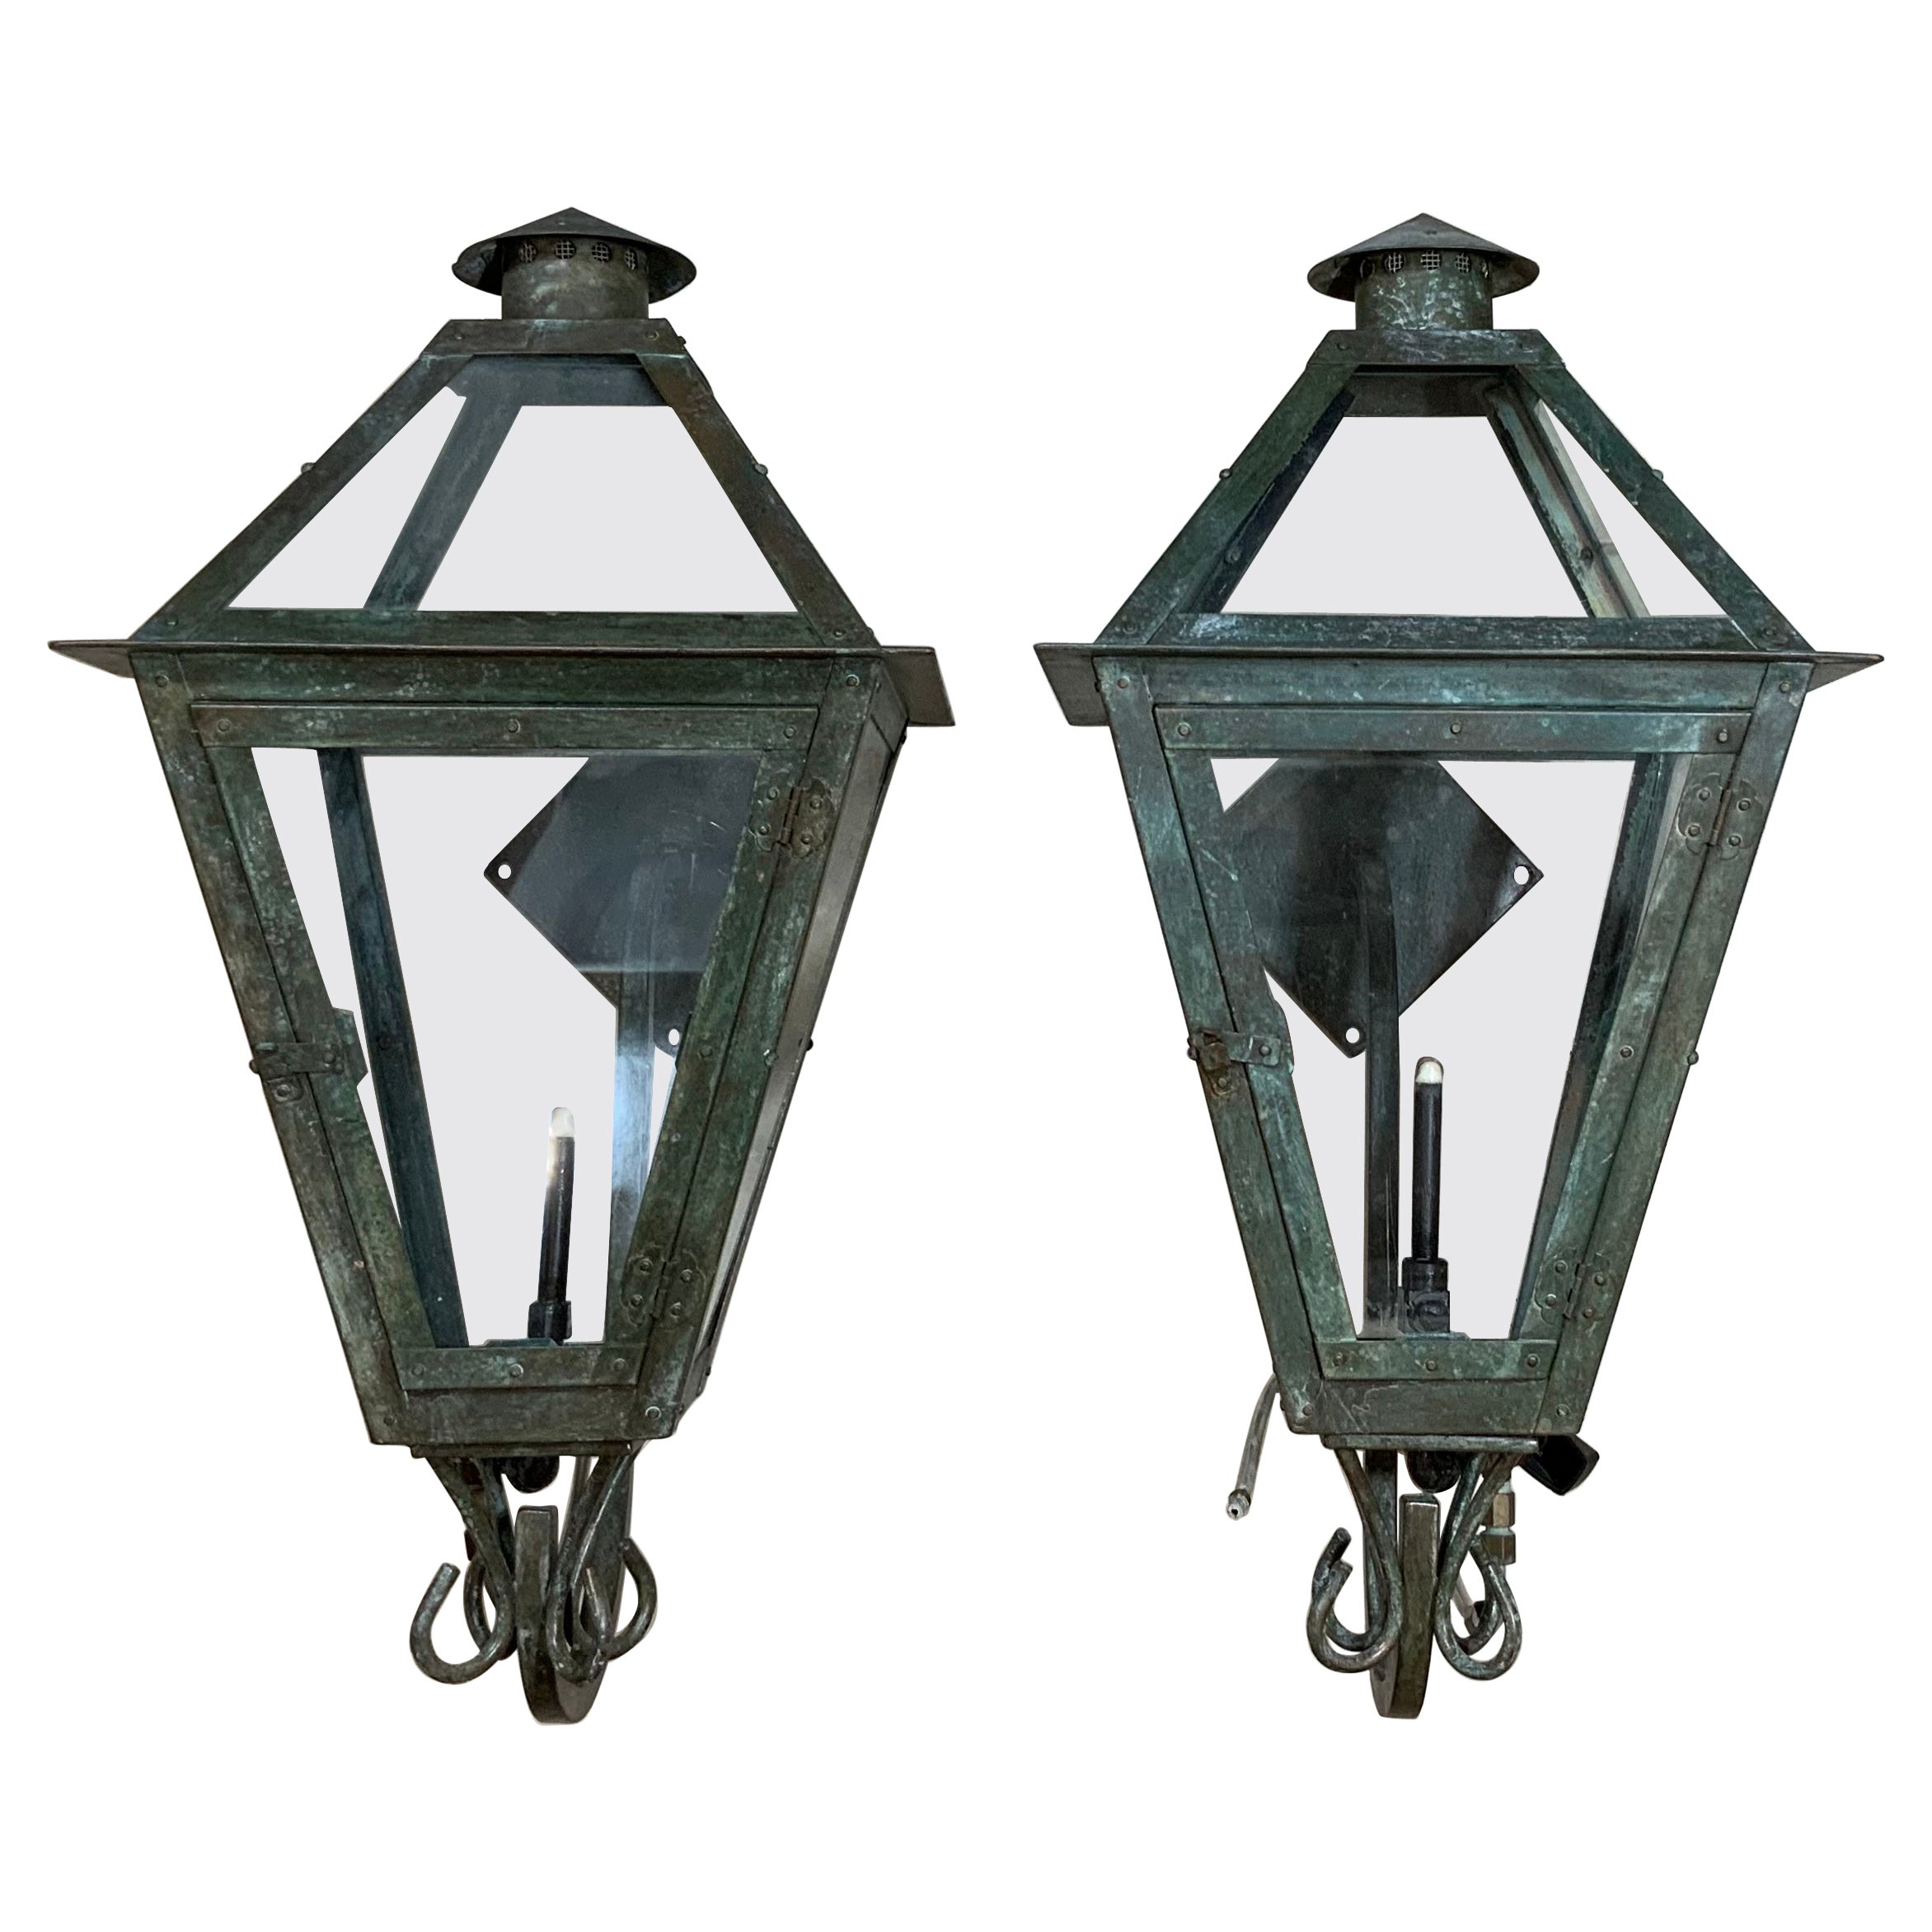 Pair of Gas Wall Hanging Copper Lantern